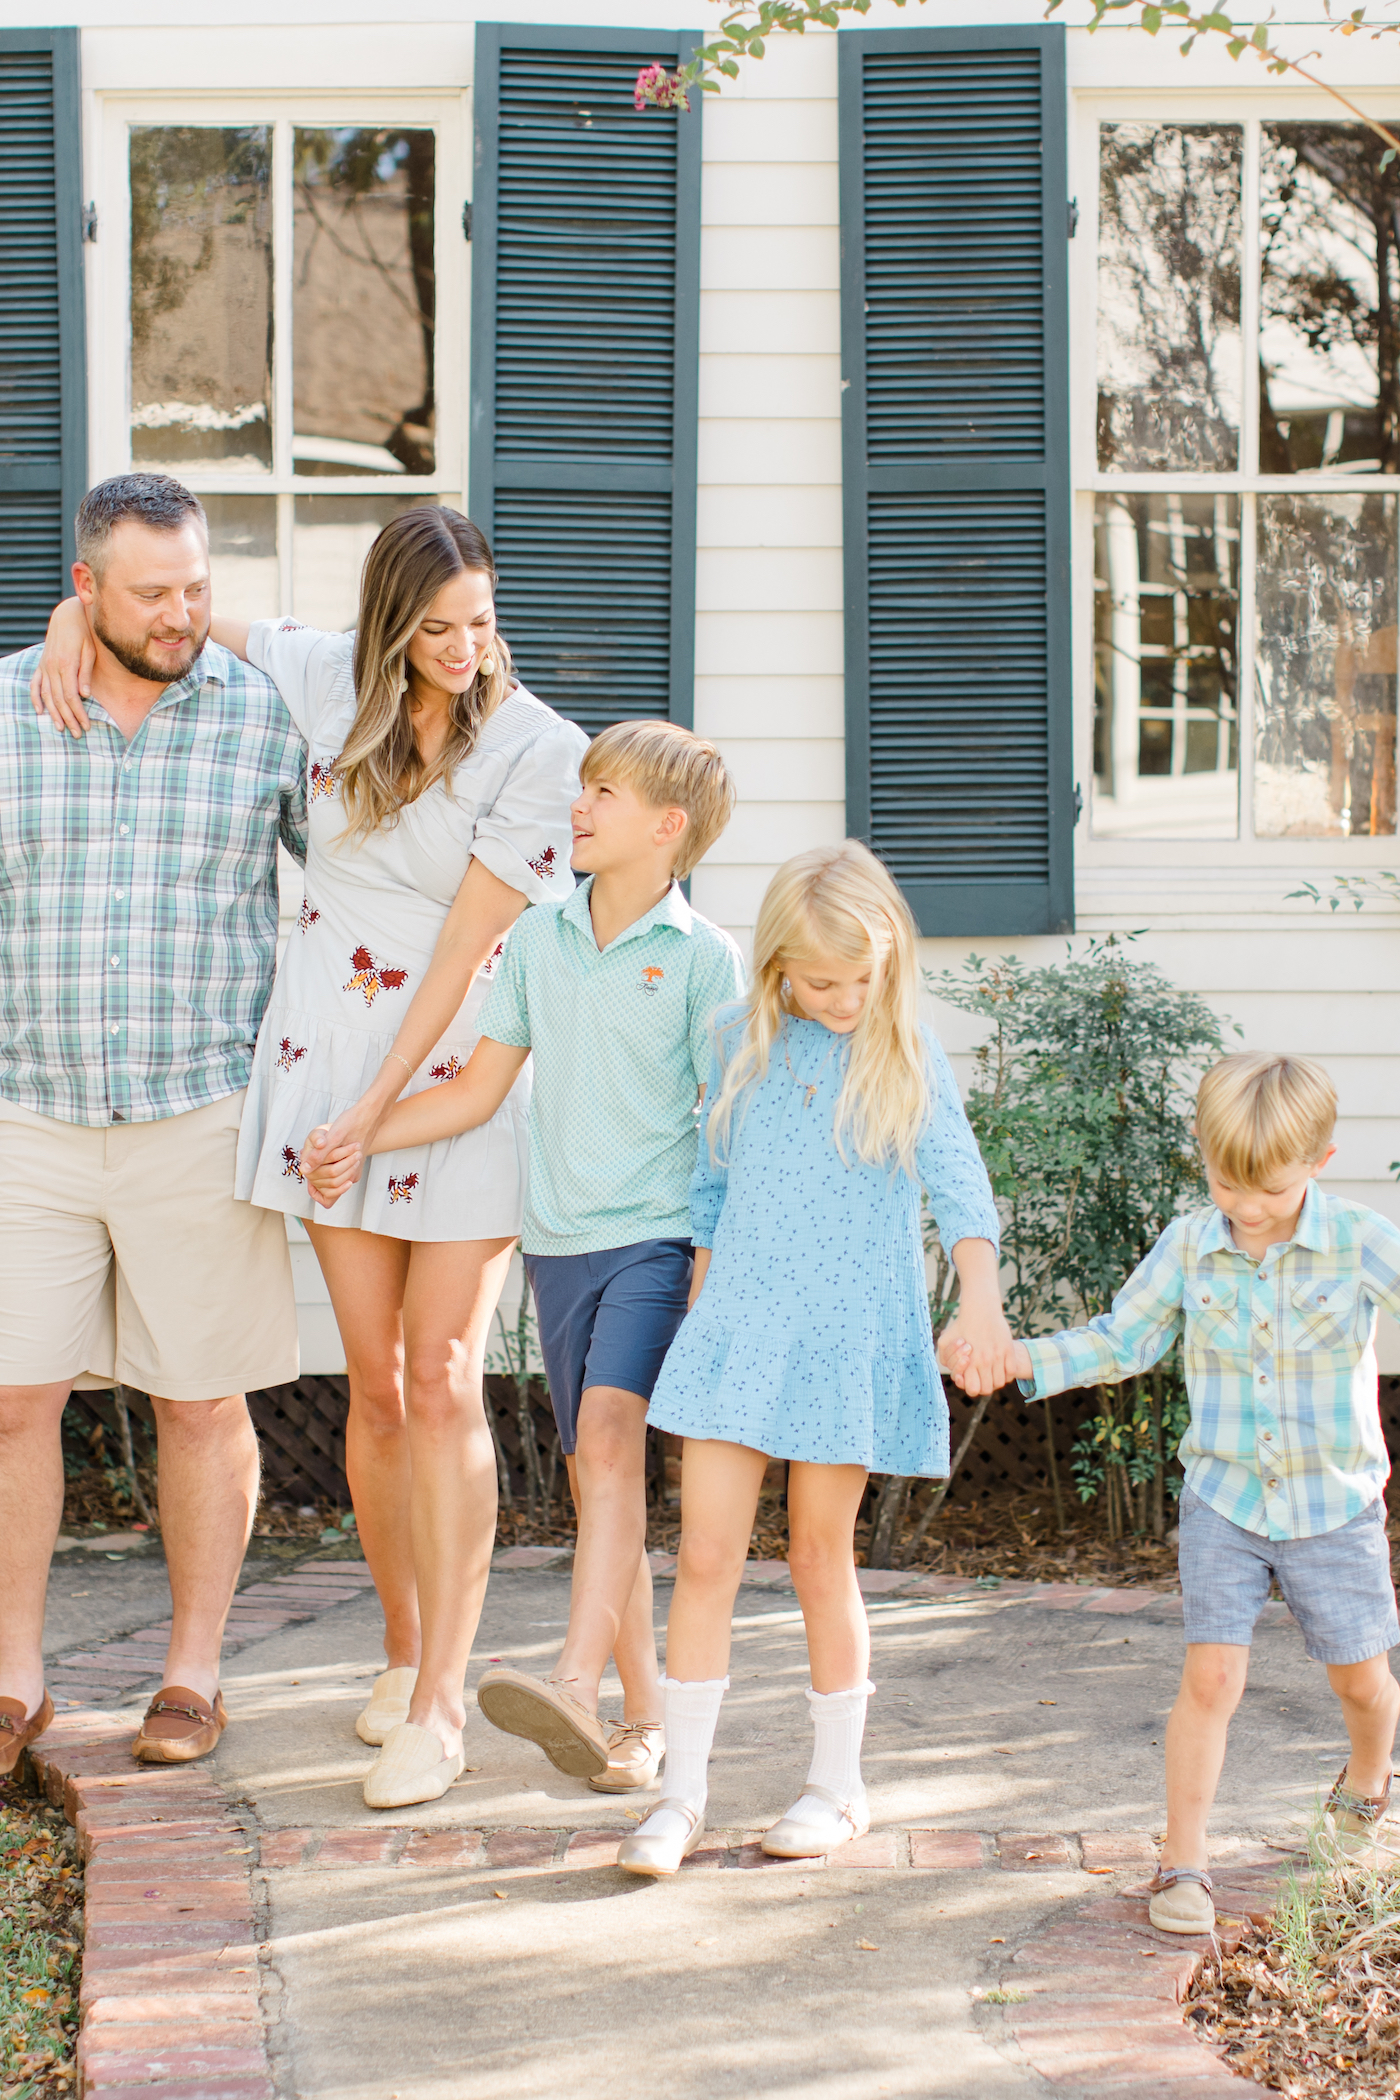 Family Christmas Card Photo Style Ideas // photos by photographer Linsday Ott from Mississippi